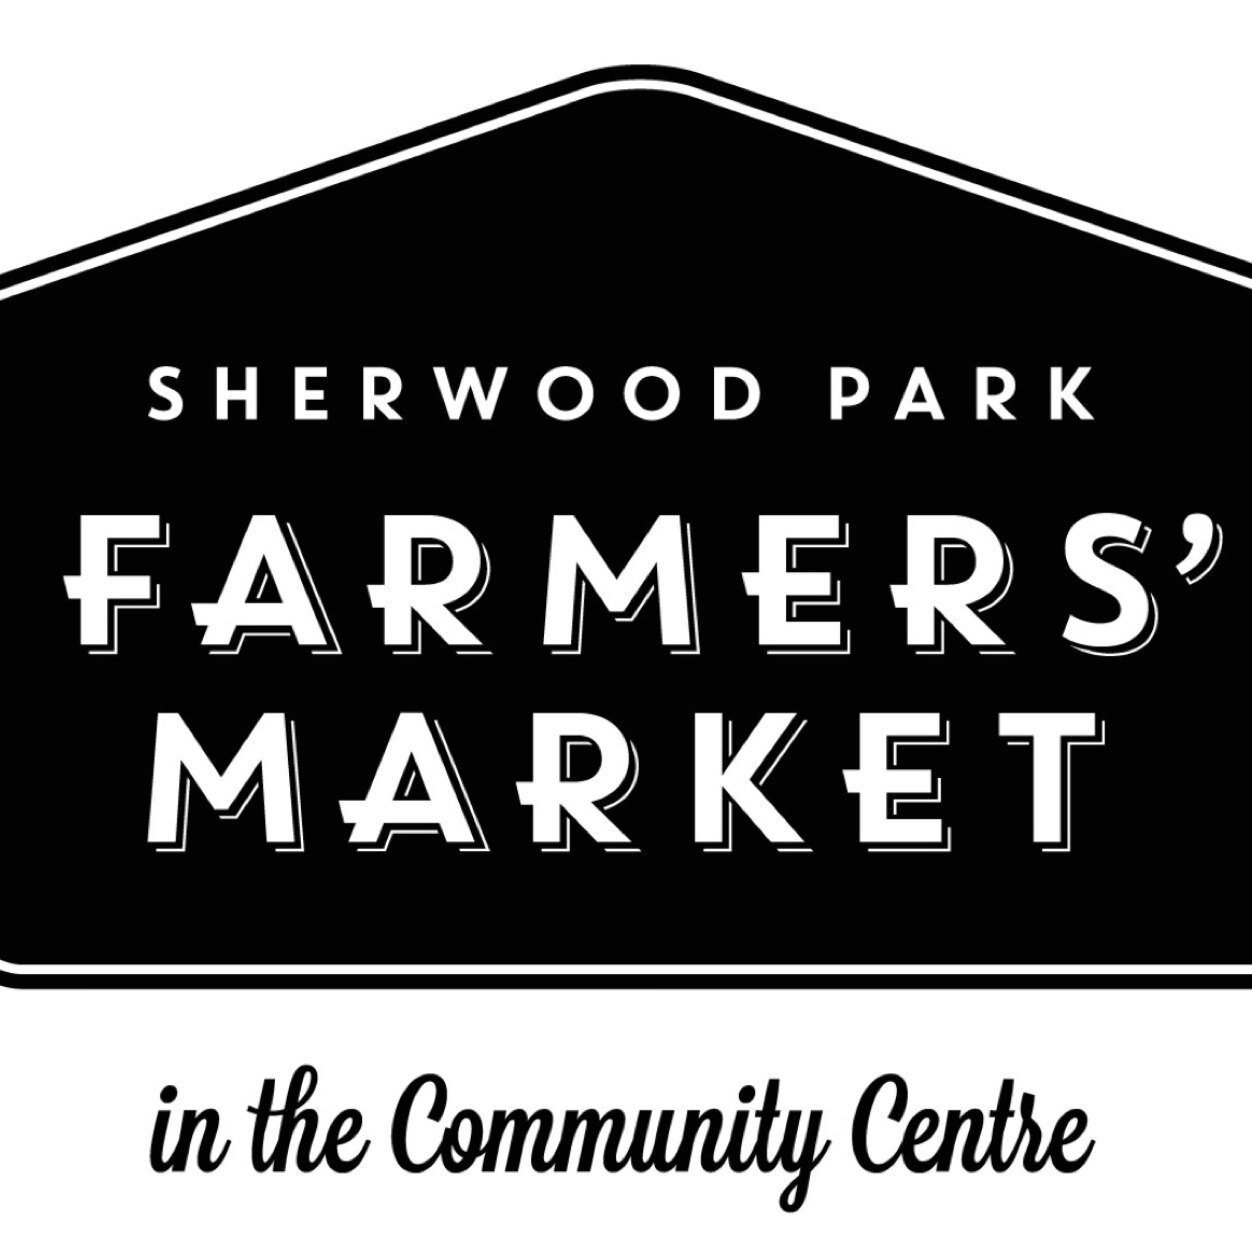 Sherwood Park Farmers Market has been proudly serving #shpk for 45yrs.  Year Round every Wednesday -Indoors Oct 21 -May 5- Outdoors  May- Oct  2-7 PM